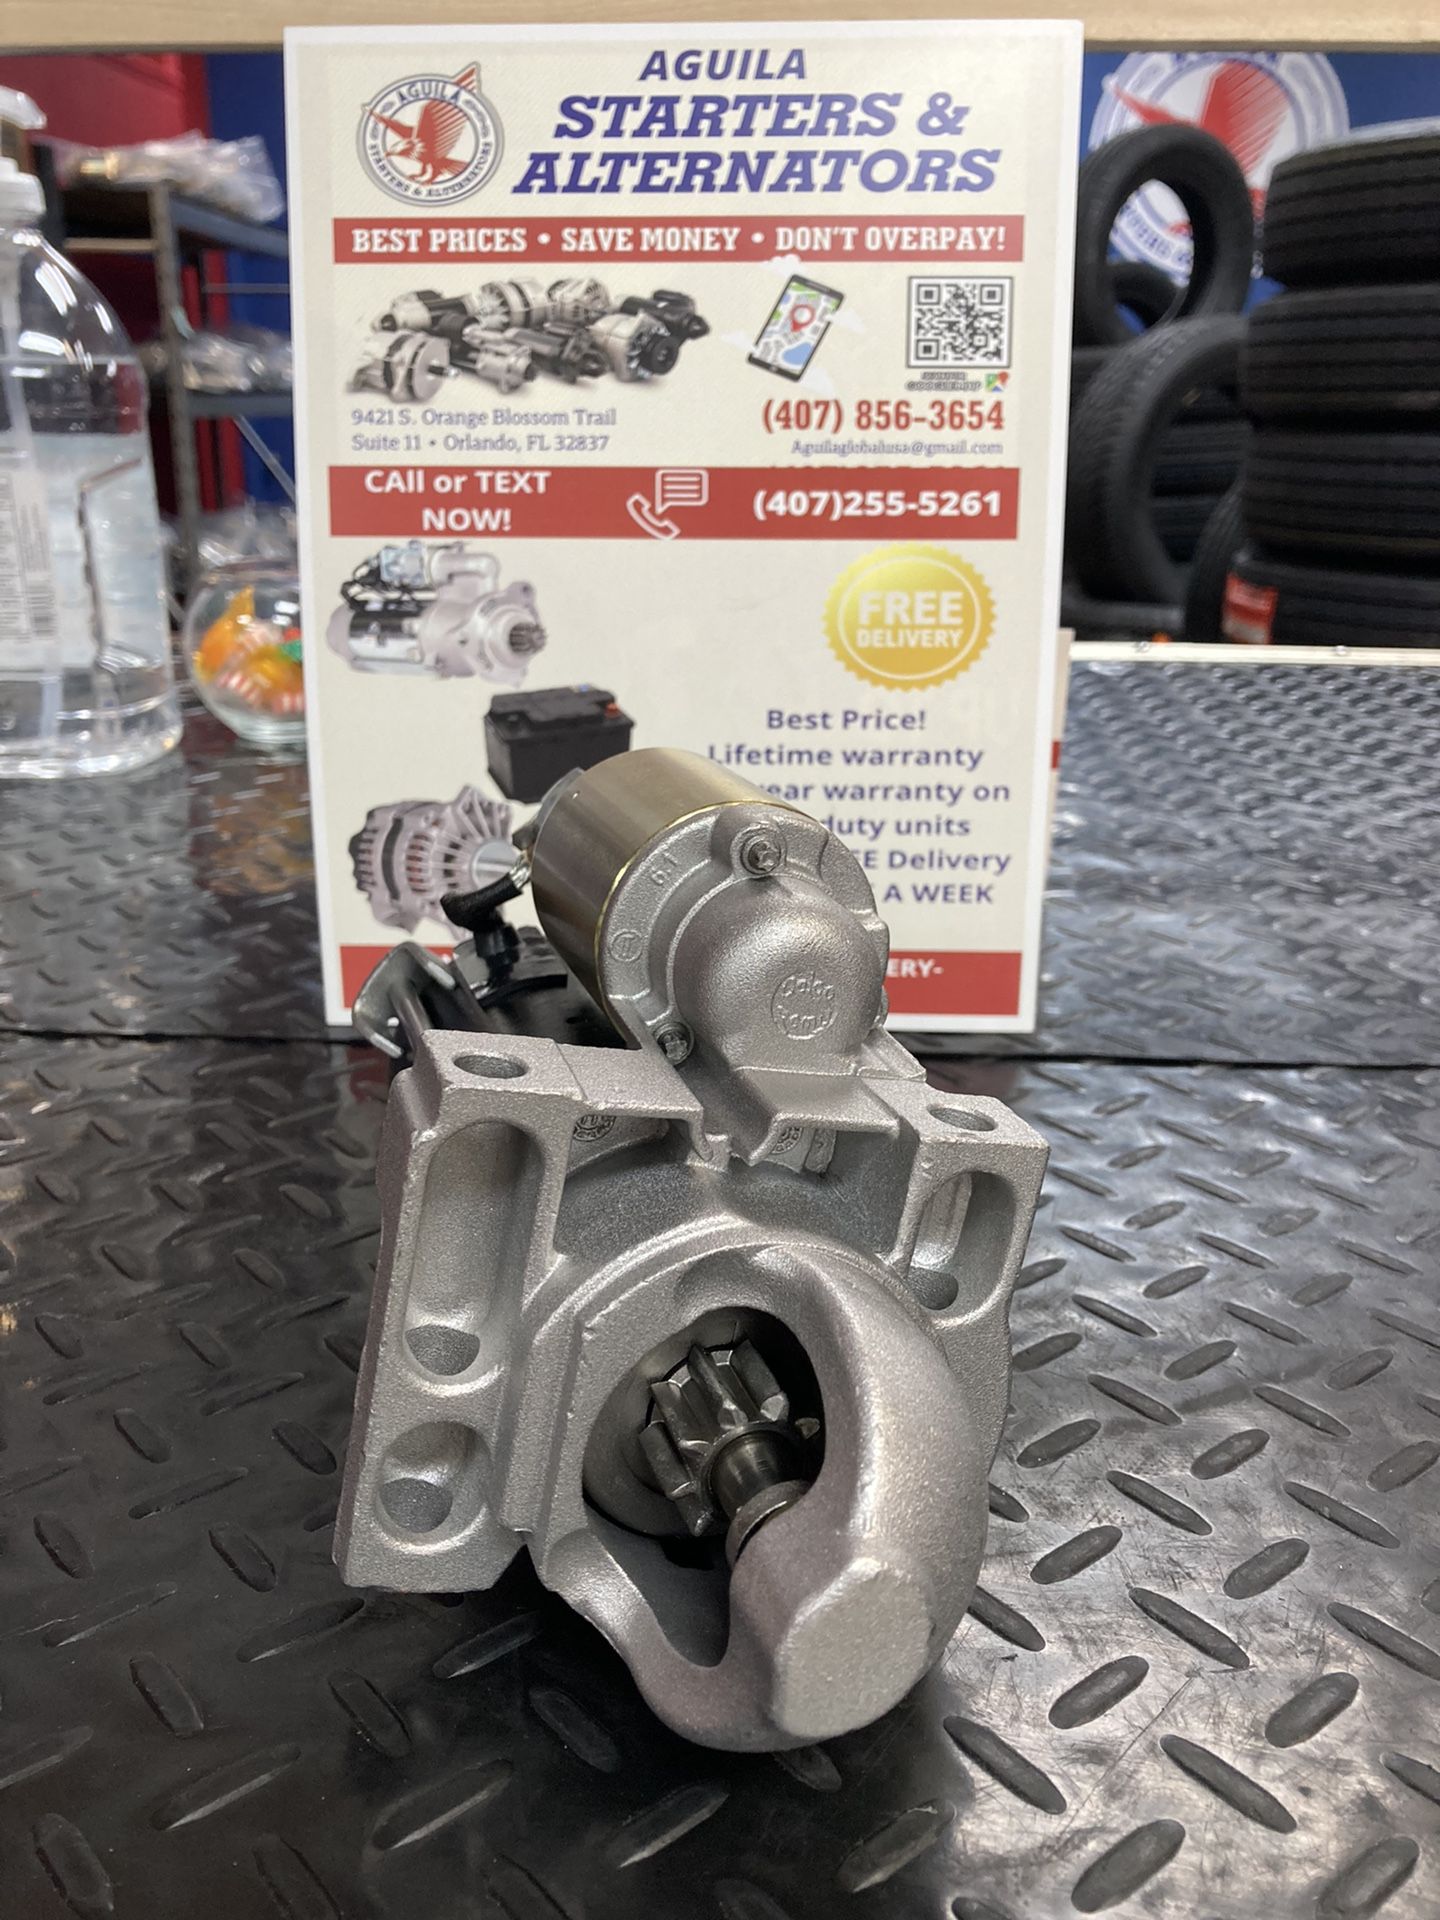 🦅AGUILA🦅 STARTER FOR BUICK/CADILLAC/GMC ON SALE! 